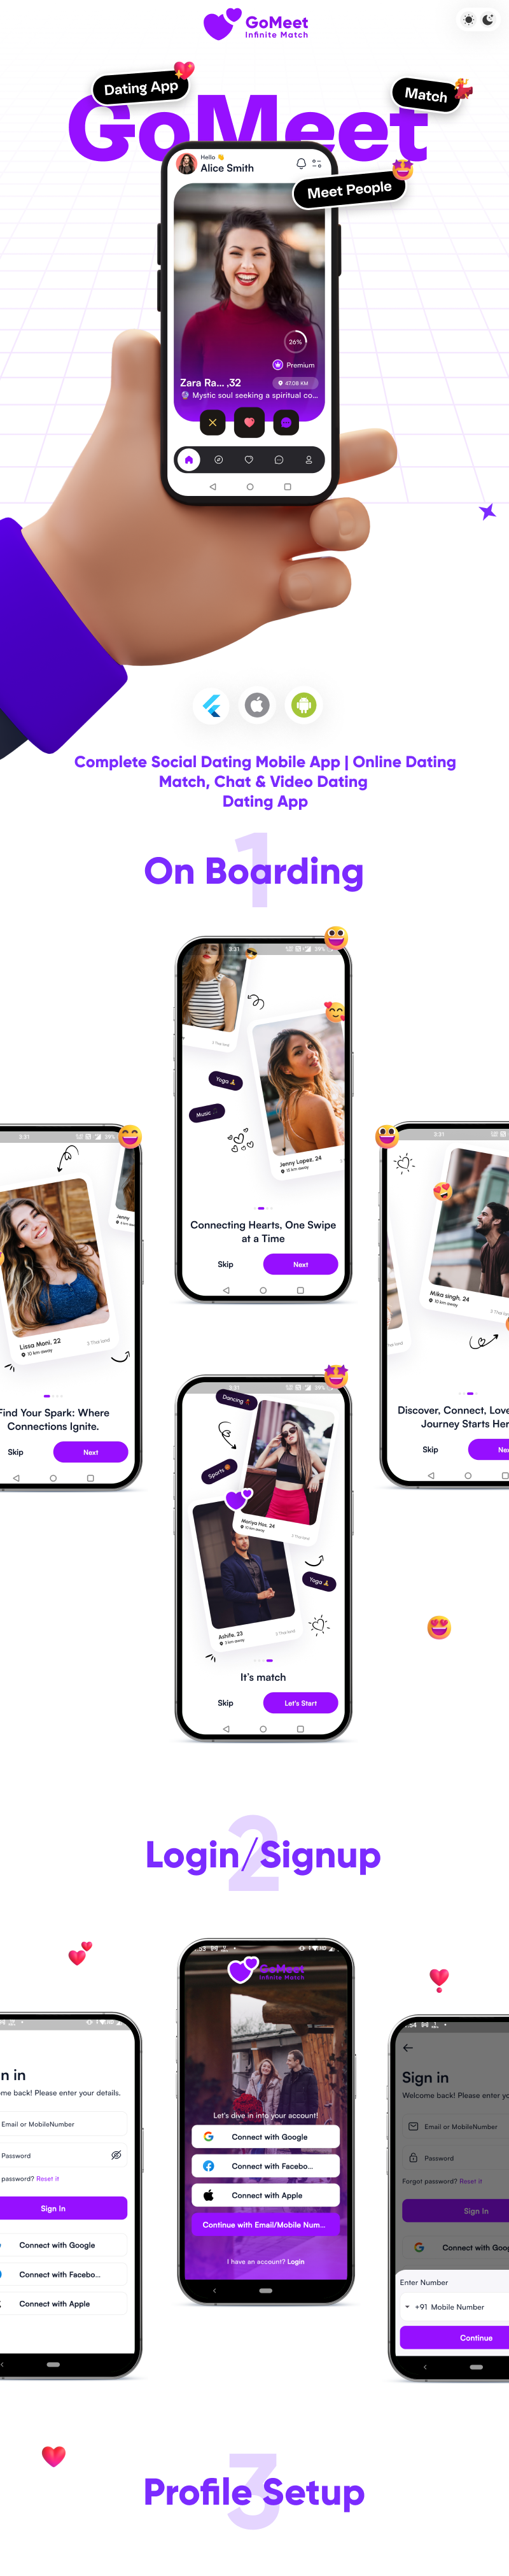 GoMeet - Complete Social Dating Mobile App | Online Dating | Match, Chat & Video Dating | Dating App - 1